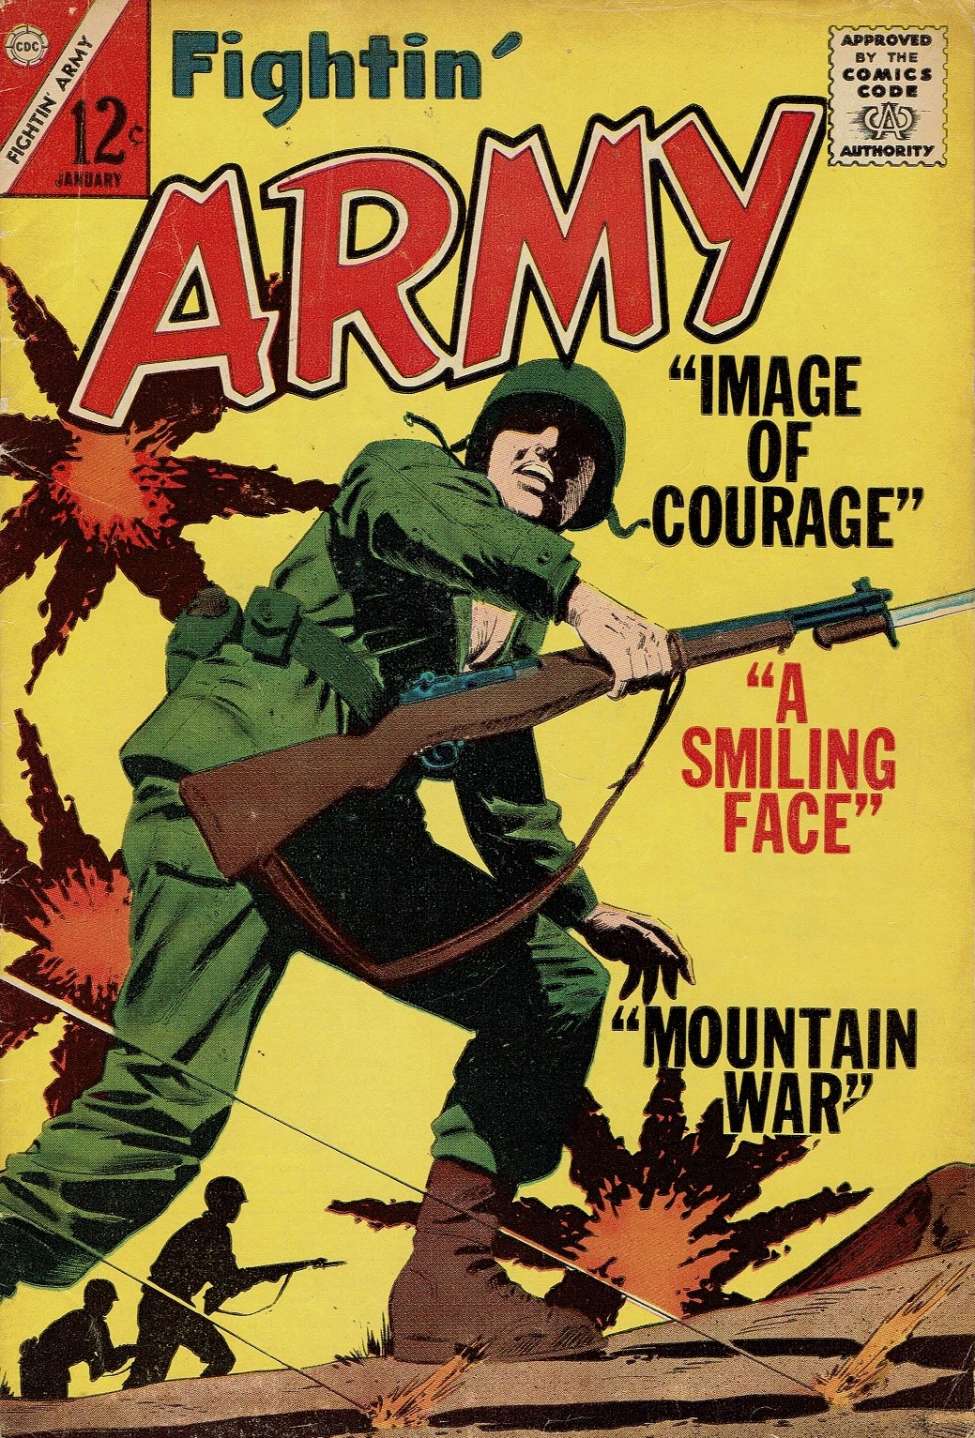 Book Cover For Fightin' Army 56